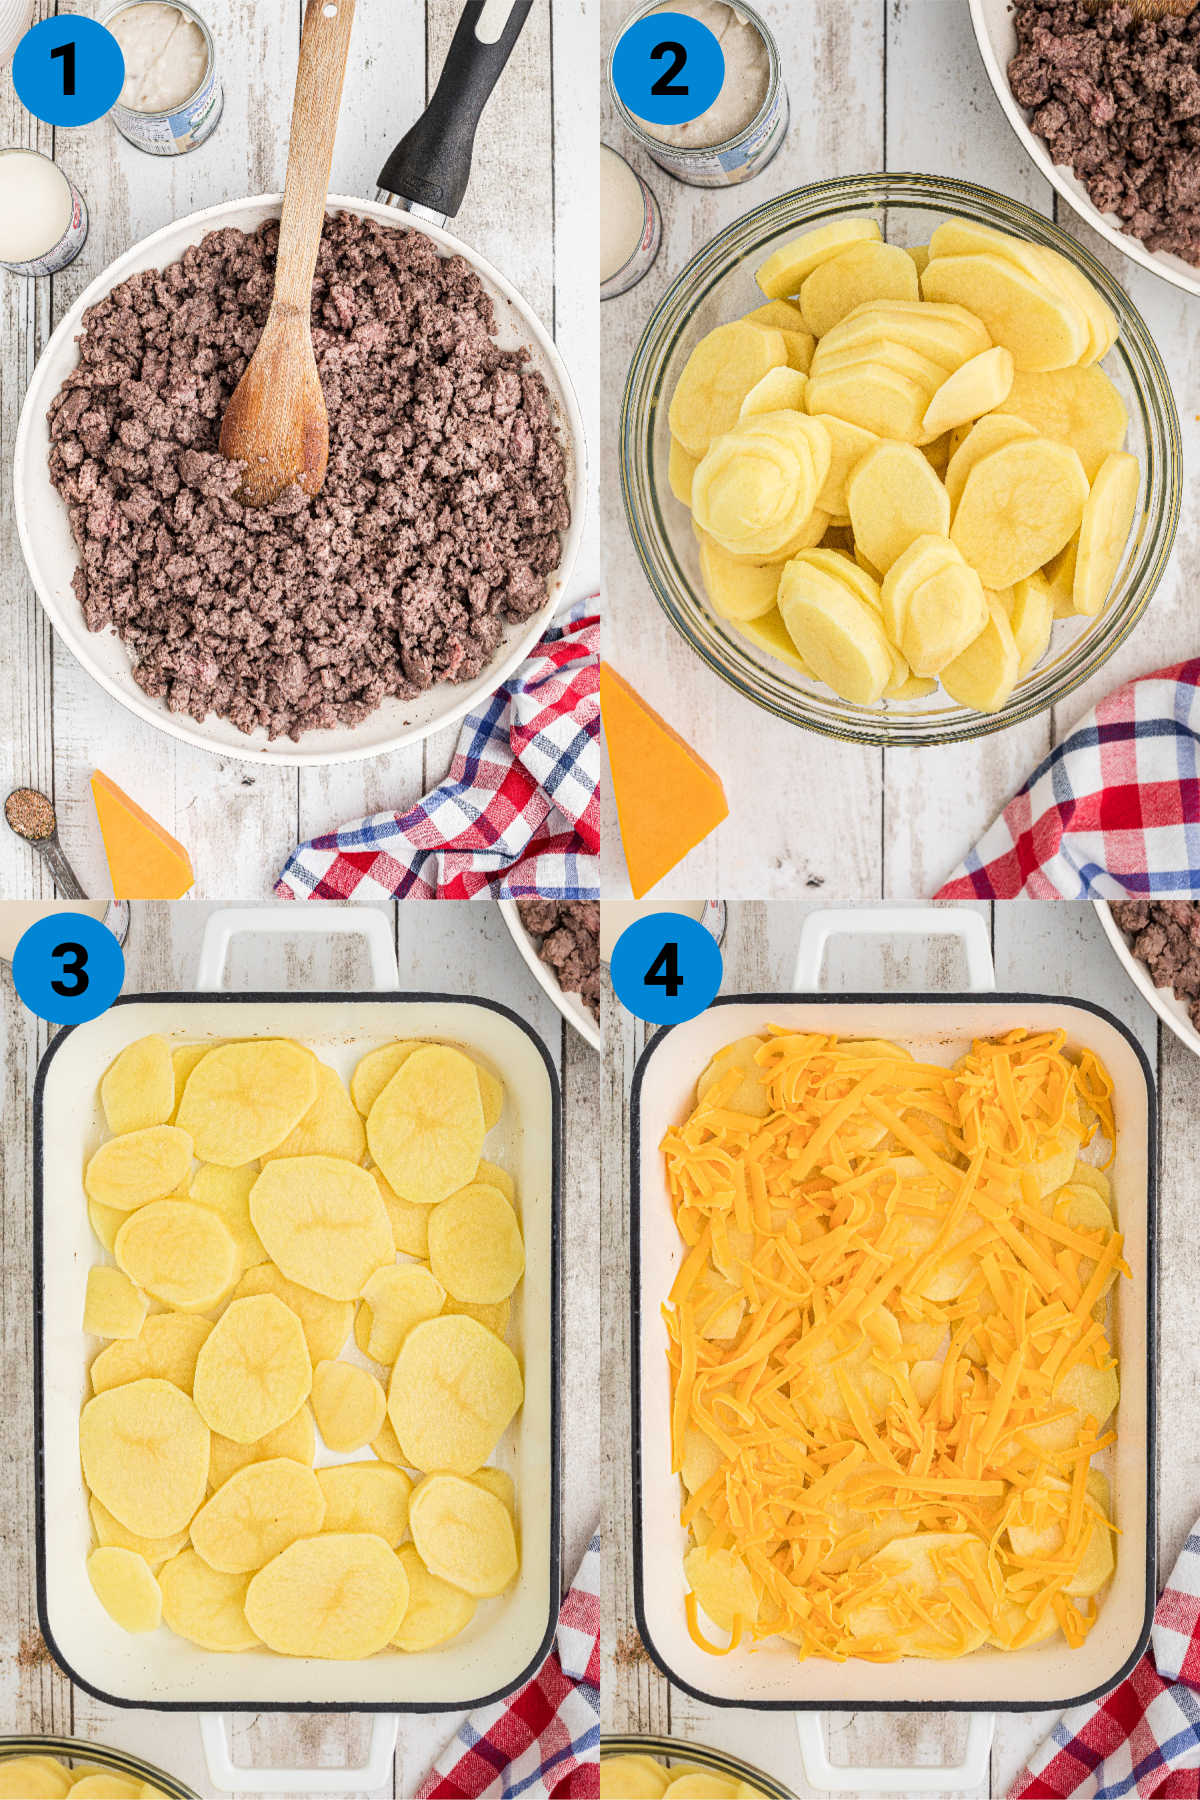 A collage of four images showing how to make a hamburger potato casserole in steps 1-4.